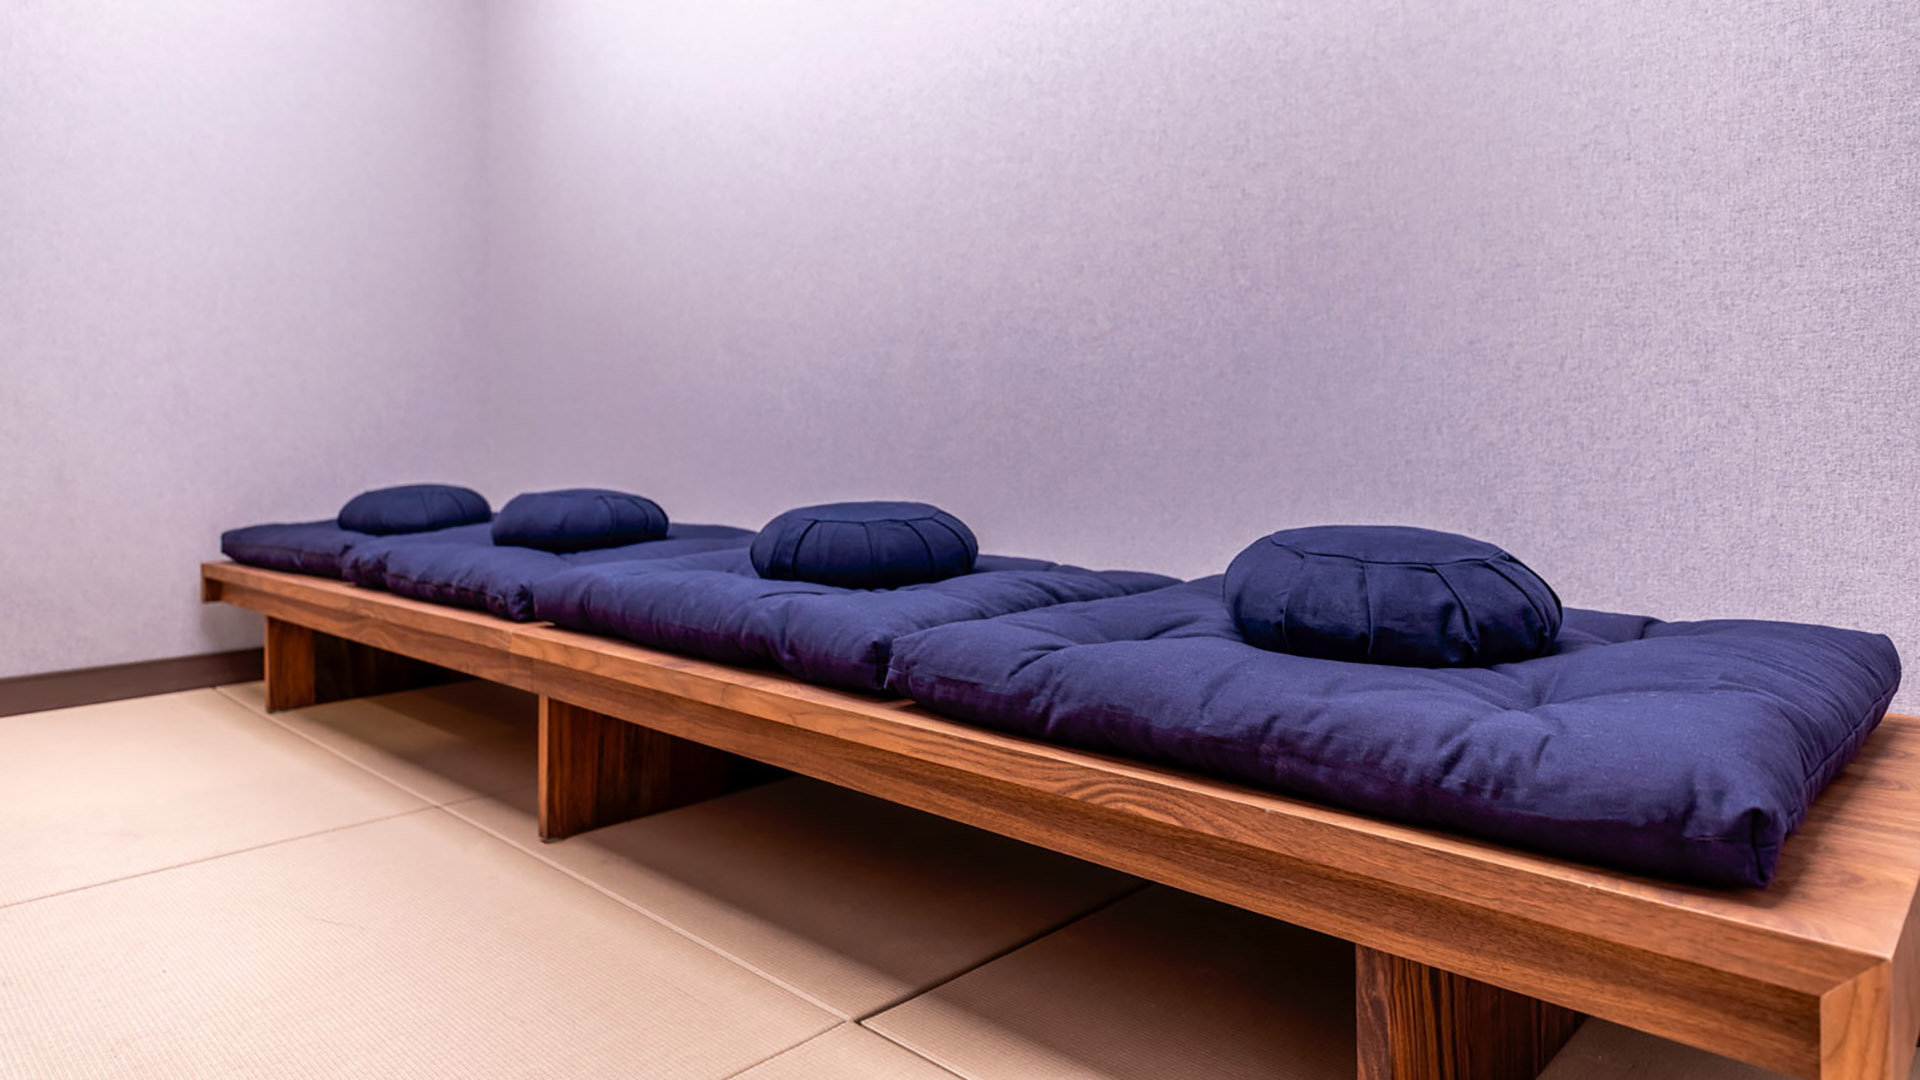 Meditation Room Located on the Amenity Level